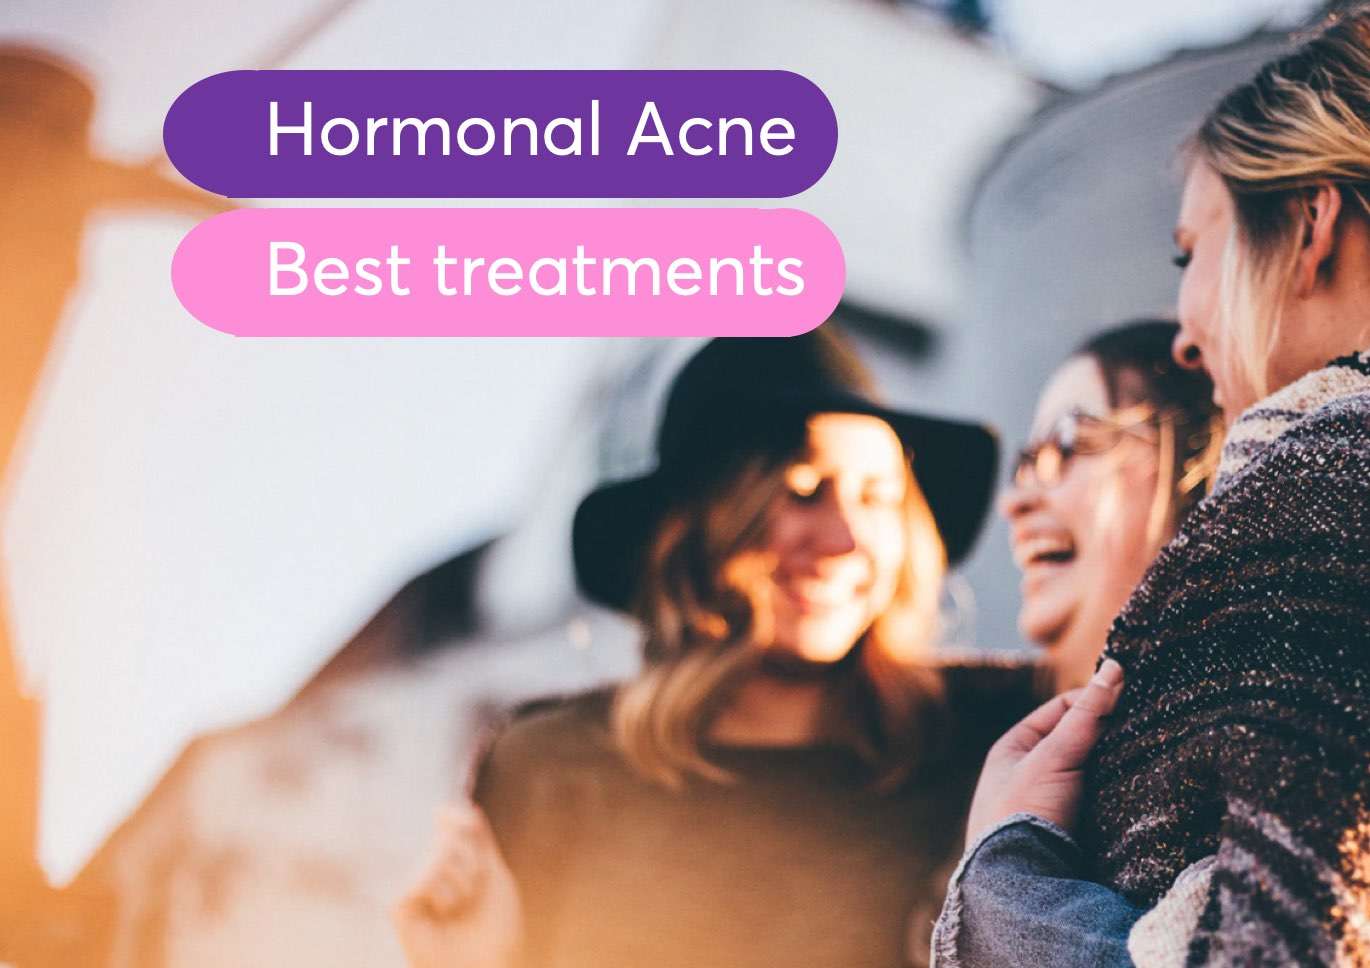 What are the best treatments for hormonal acne?